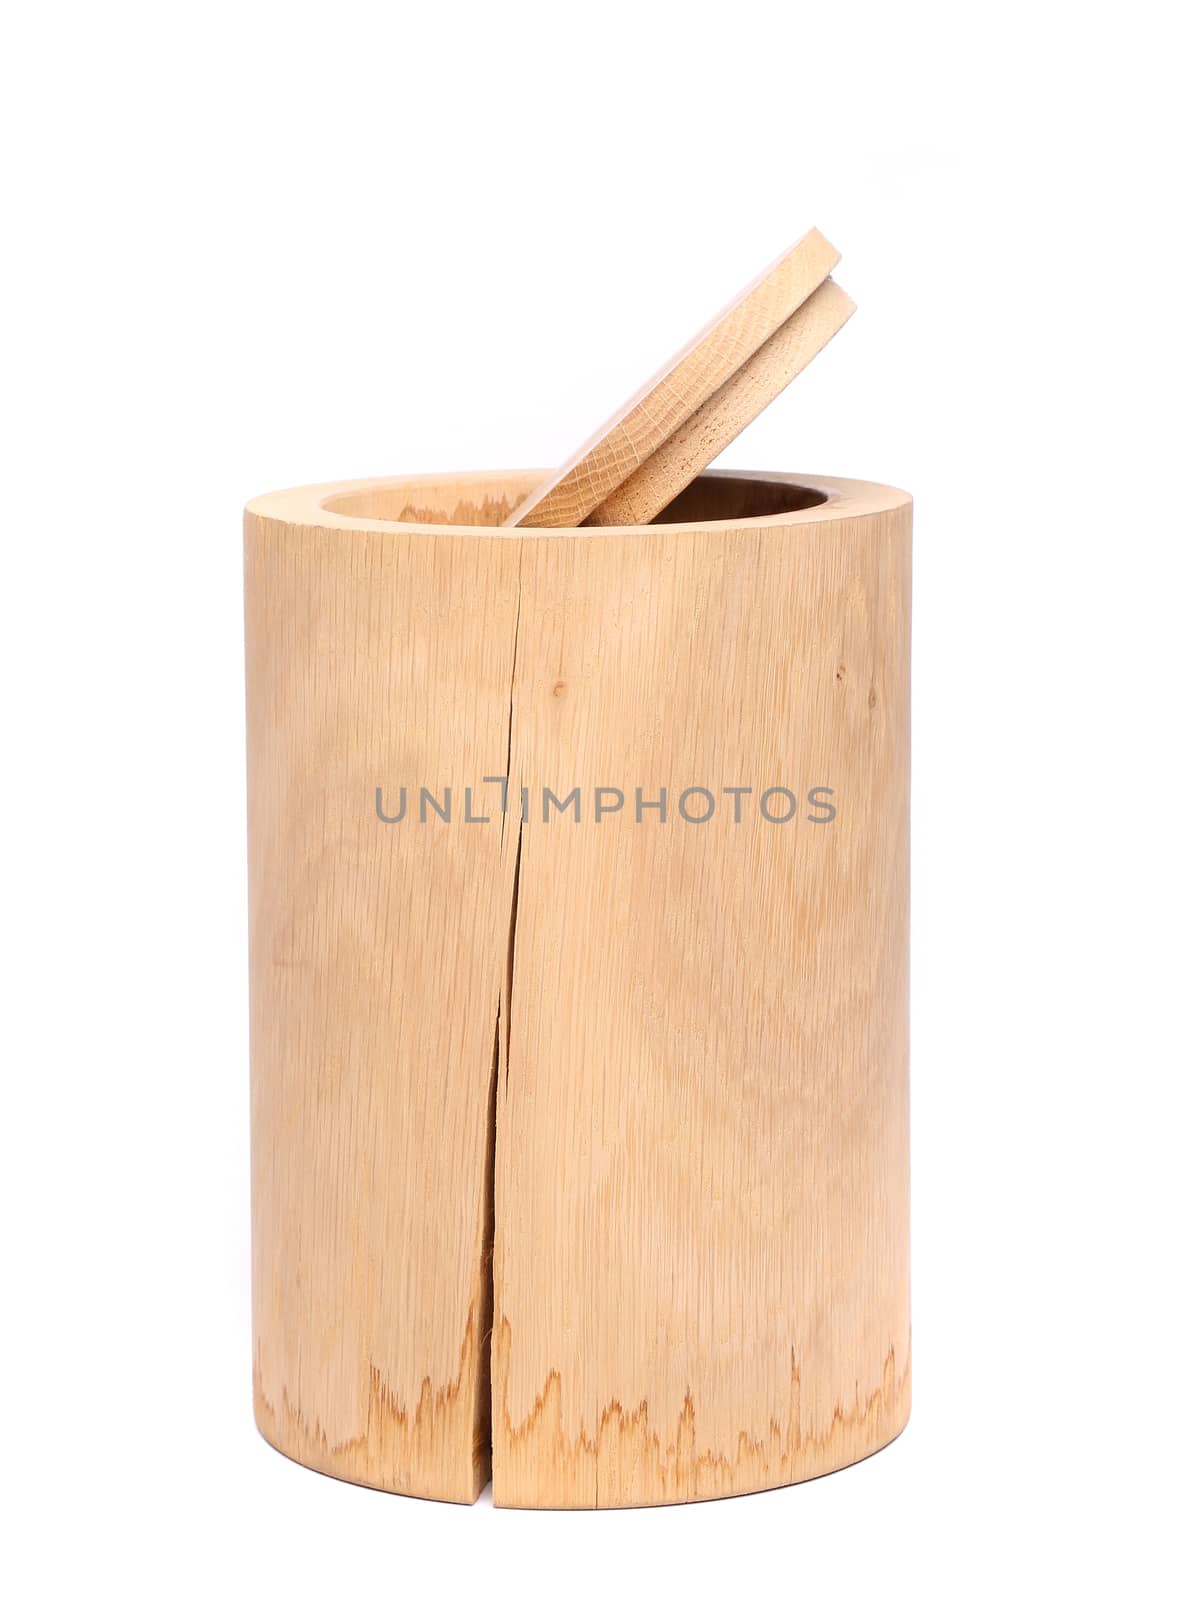 Birch bark container with open top